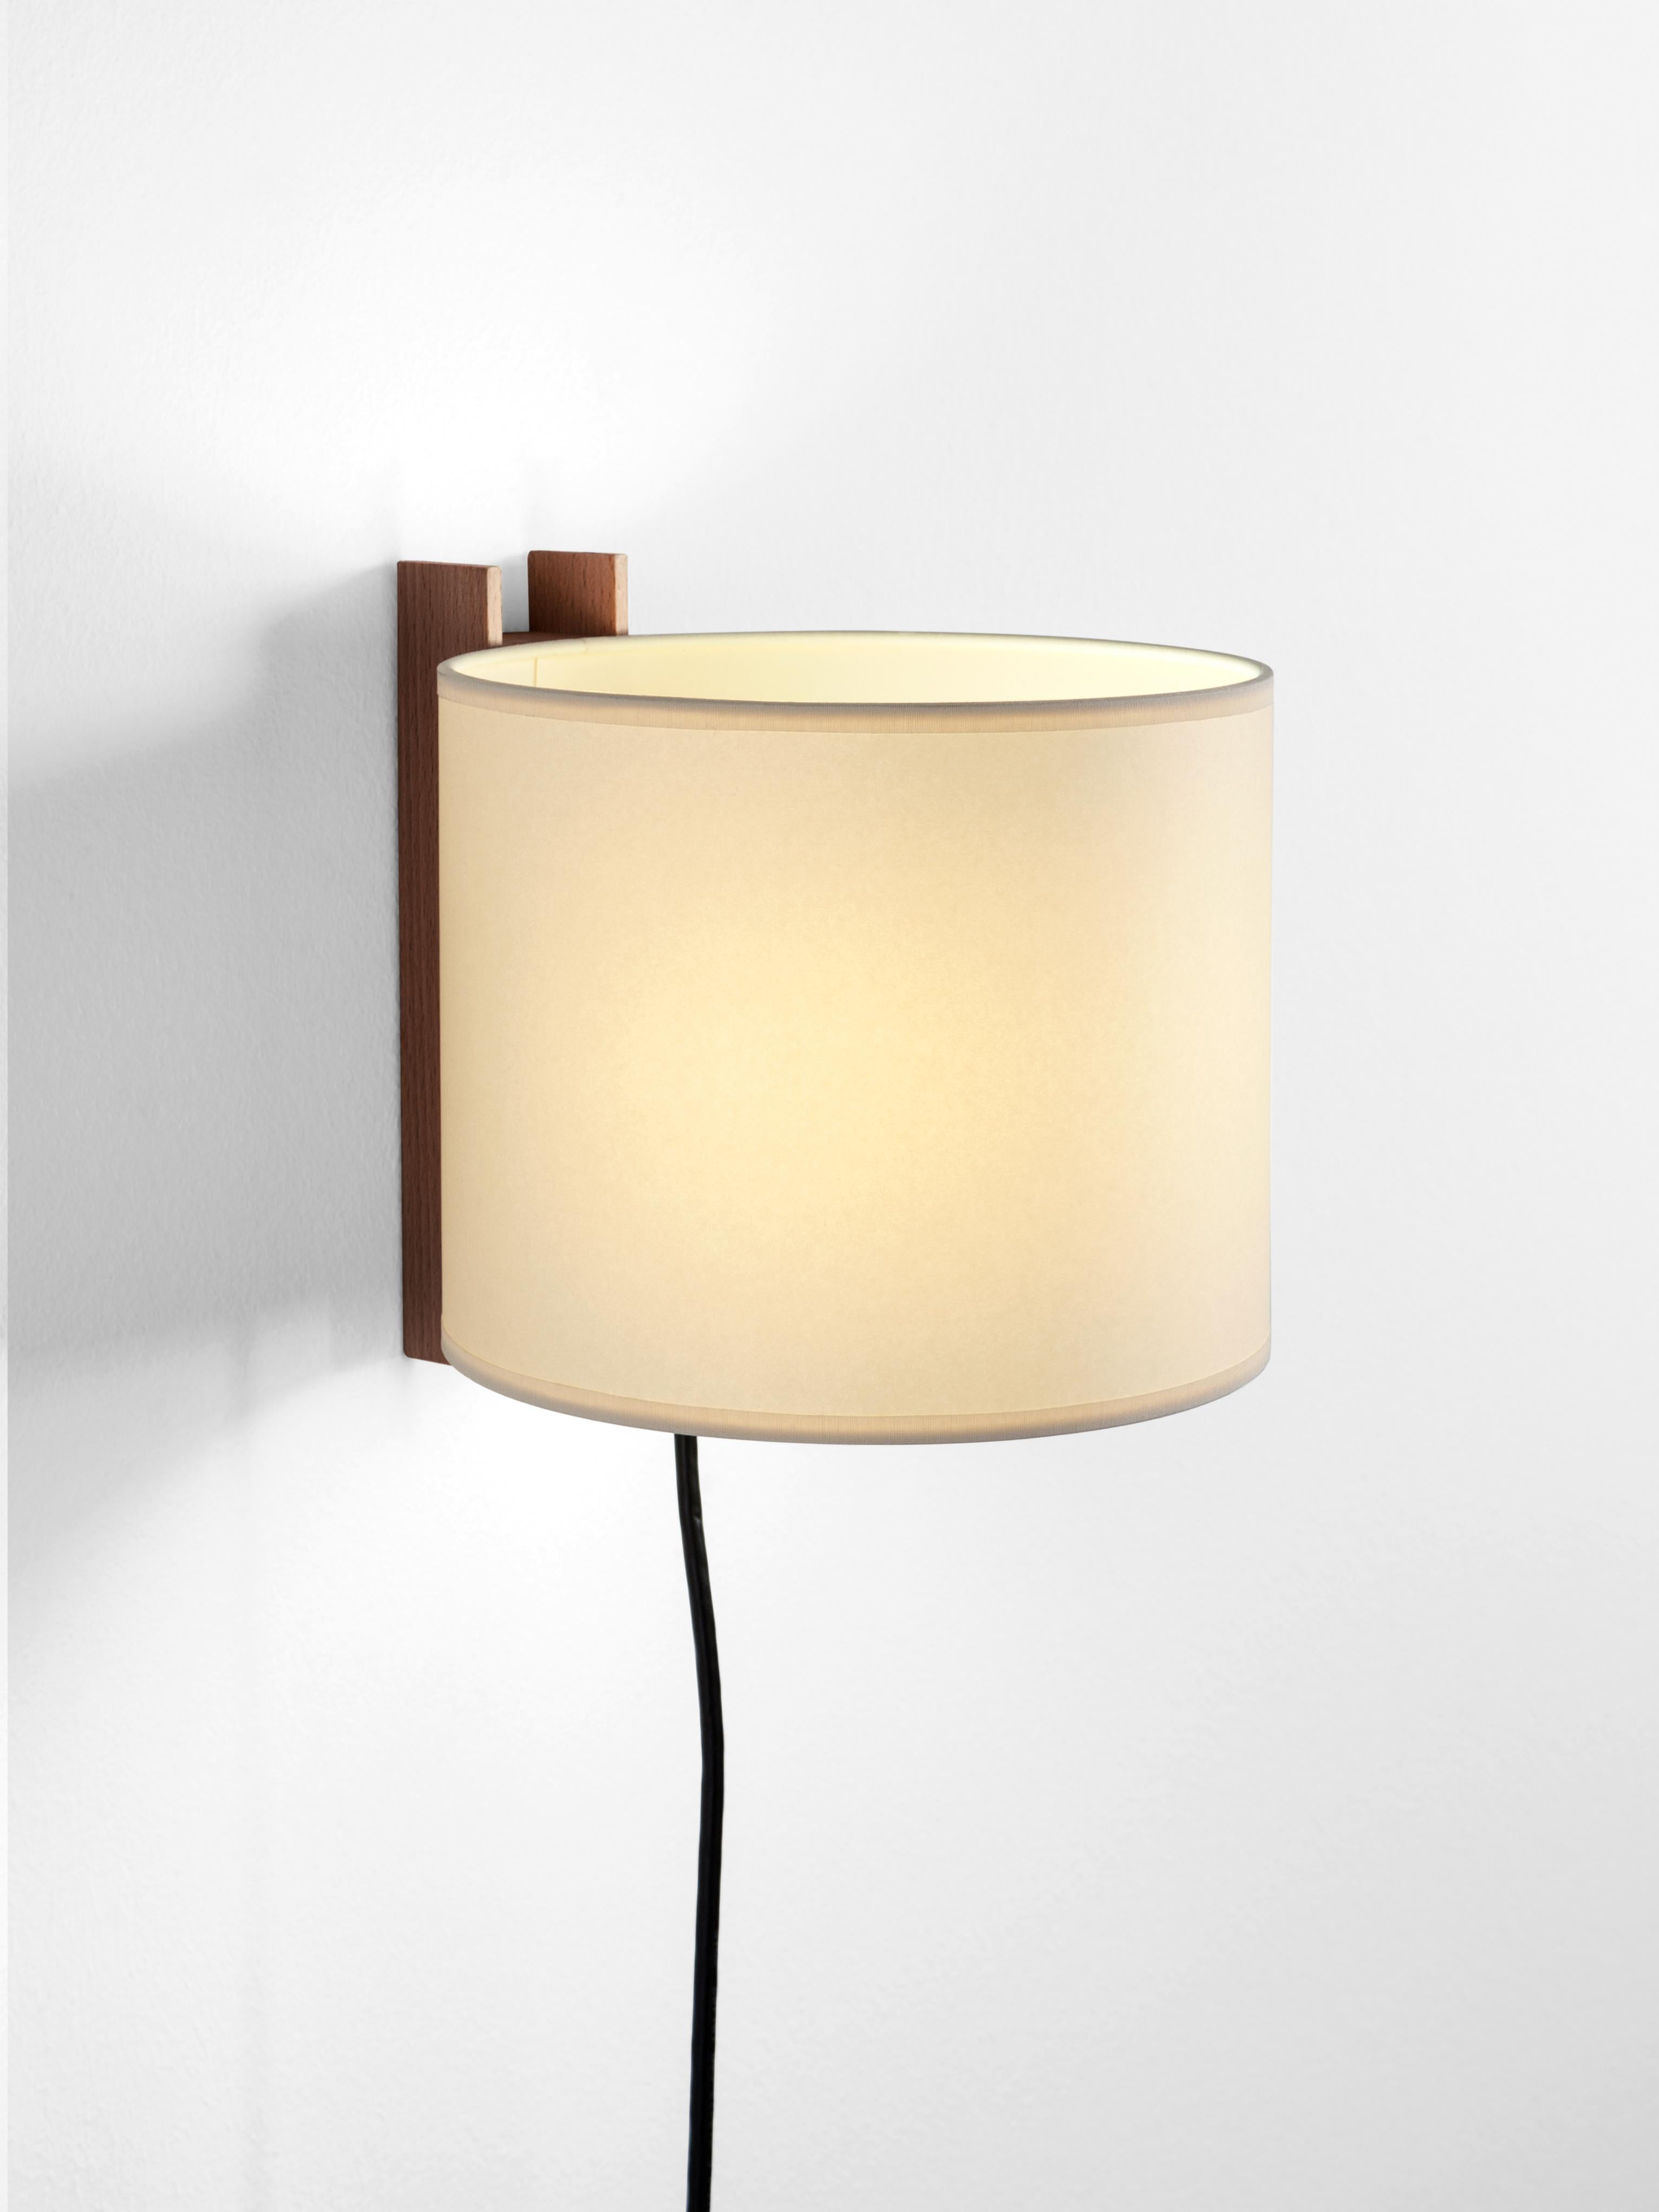 Beige and walnut TMM Corto wall lamp by Miguel Milá
Dimensions: D 20 x W 23 x H 20 cm
Materials: Metal, walnut wood, parchment lampshade.
With plug.
Available in beech or walnut and in white or beige lampshade.
Available with plug or direct